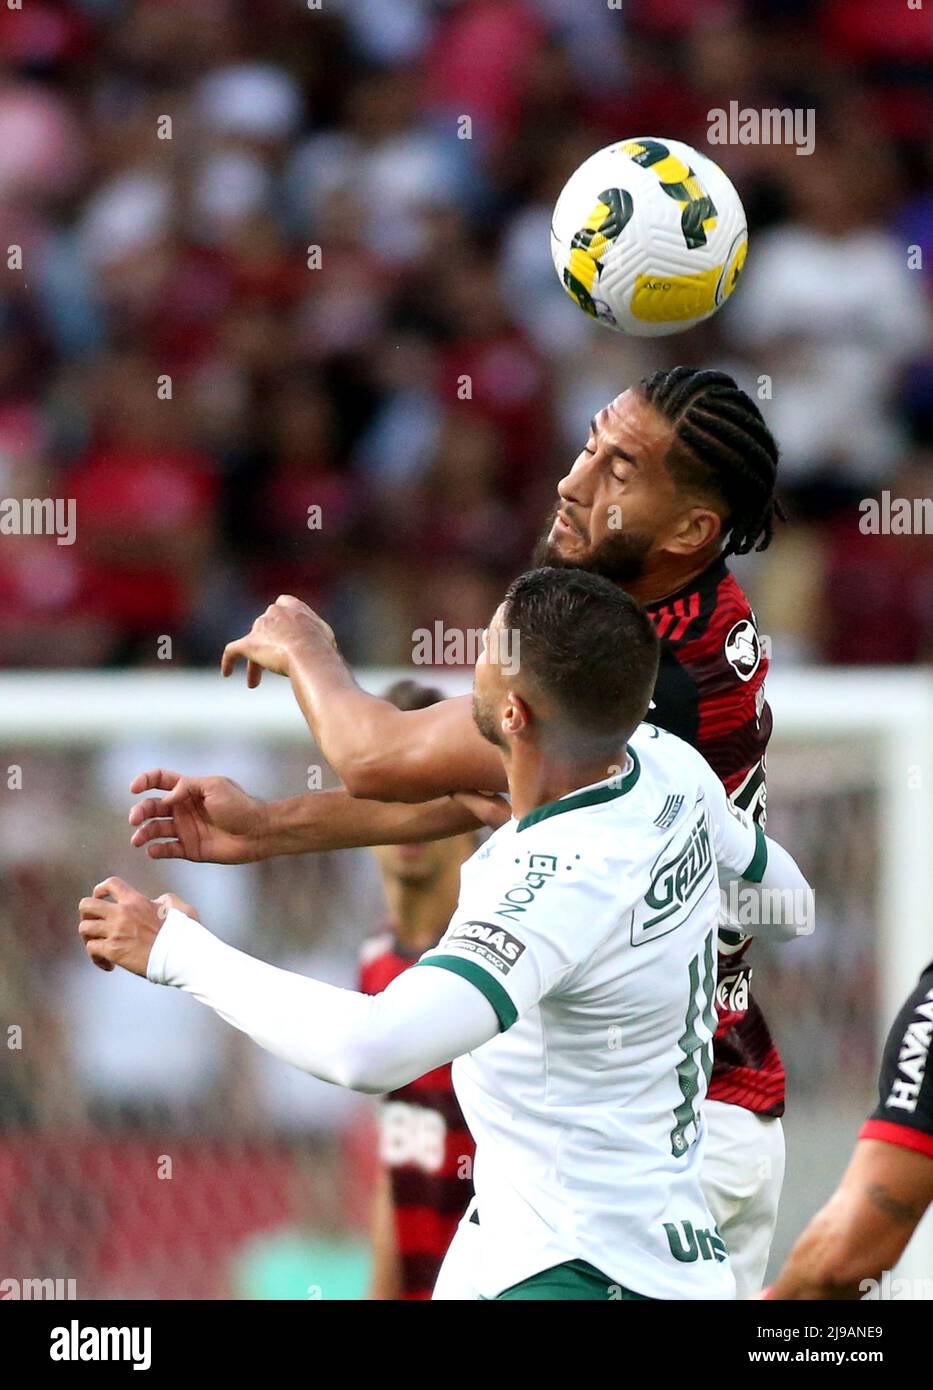 RIO DE JANEIRO, BRAZIL - MAY 21: Pedro Raul of Goias heads the ball against Pablo of Flamengo ,during the match between Flamengo and Goias as part of Brasileirao Series A 2022 at Maracana Stadium on May 21, 2022 in Rio de Janeiro, Brazil. (Photo by MB Media) Stock Photo